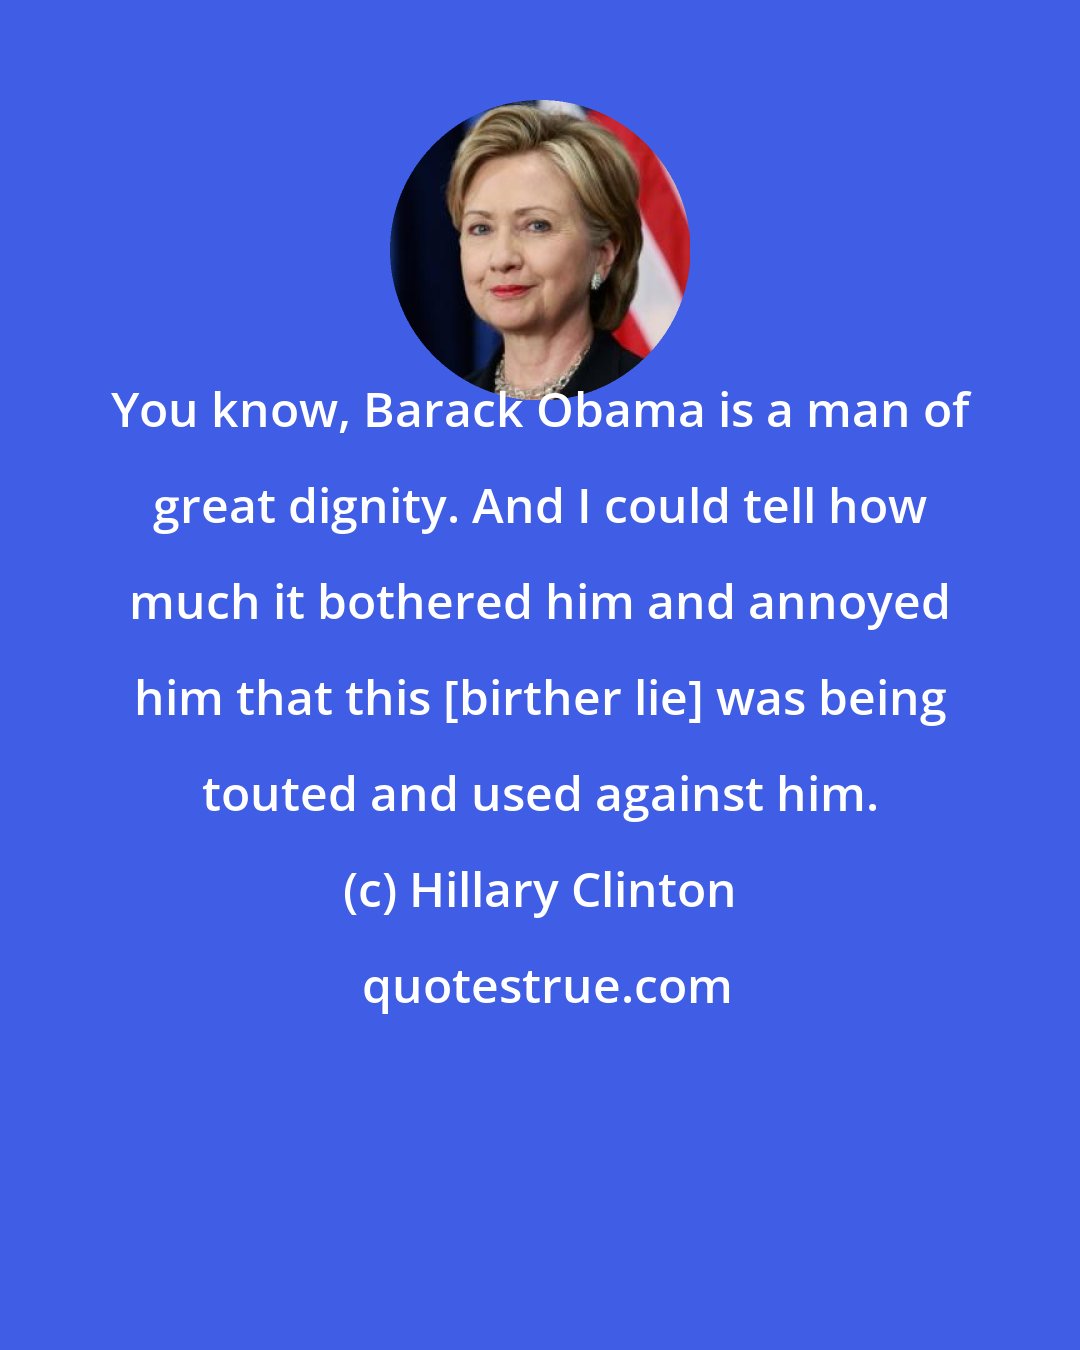 Hillary Clinton: You know, Barack Obama is a man of great dignity. And I could tell how much it bothered him and annoyed him that this [birther lie] was being touted and used against him.